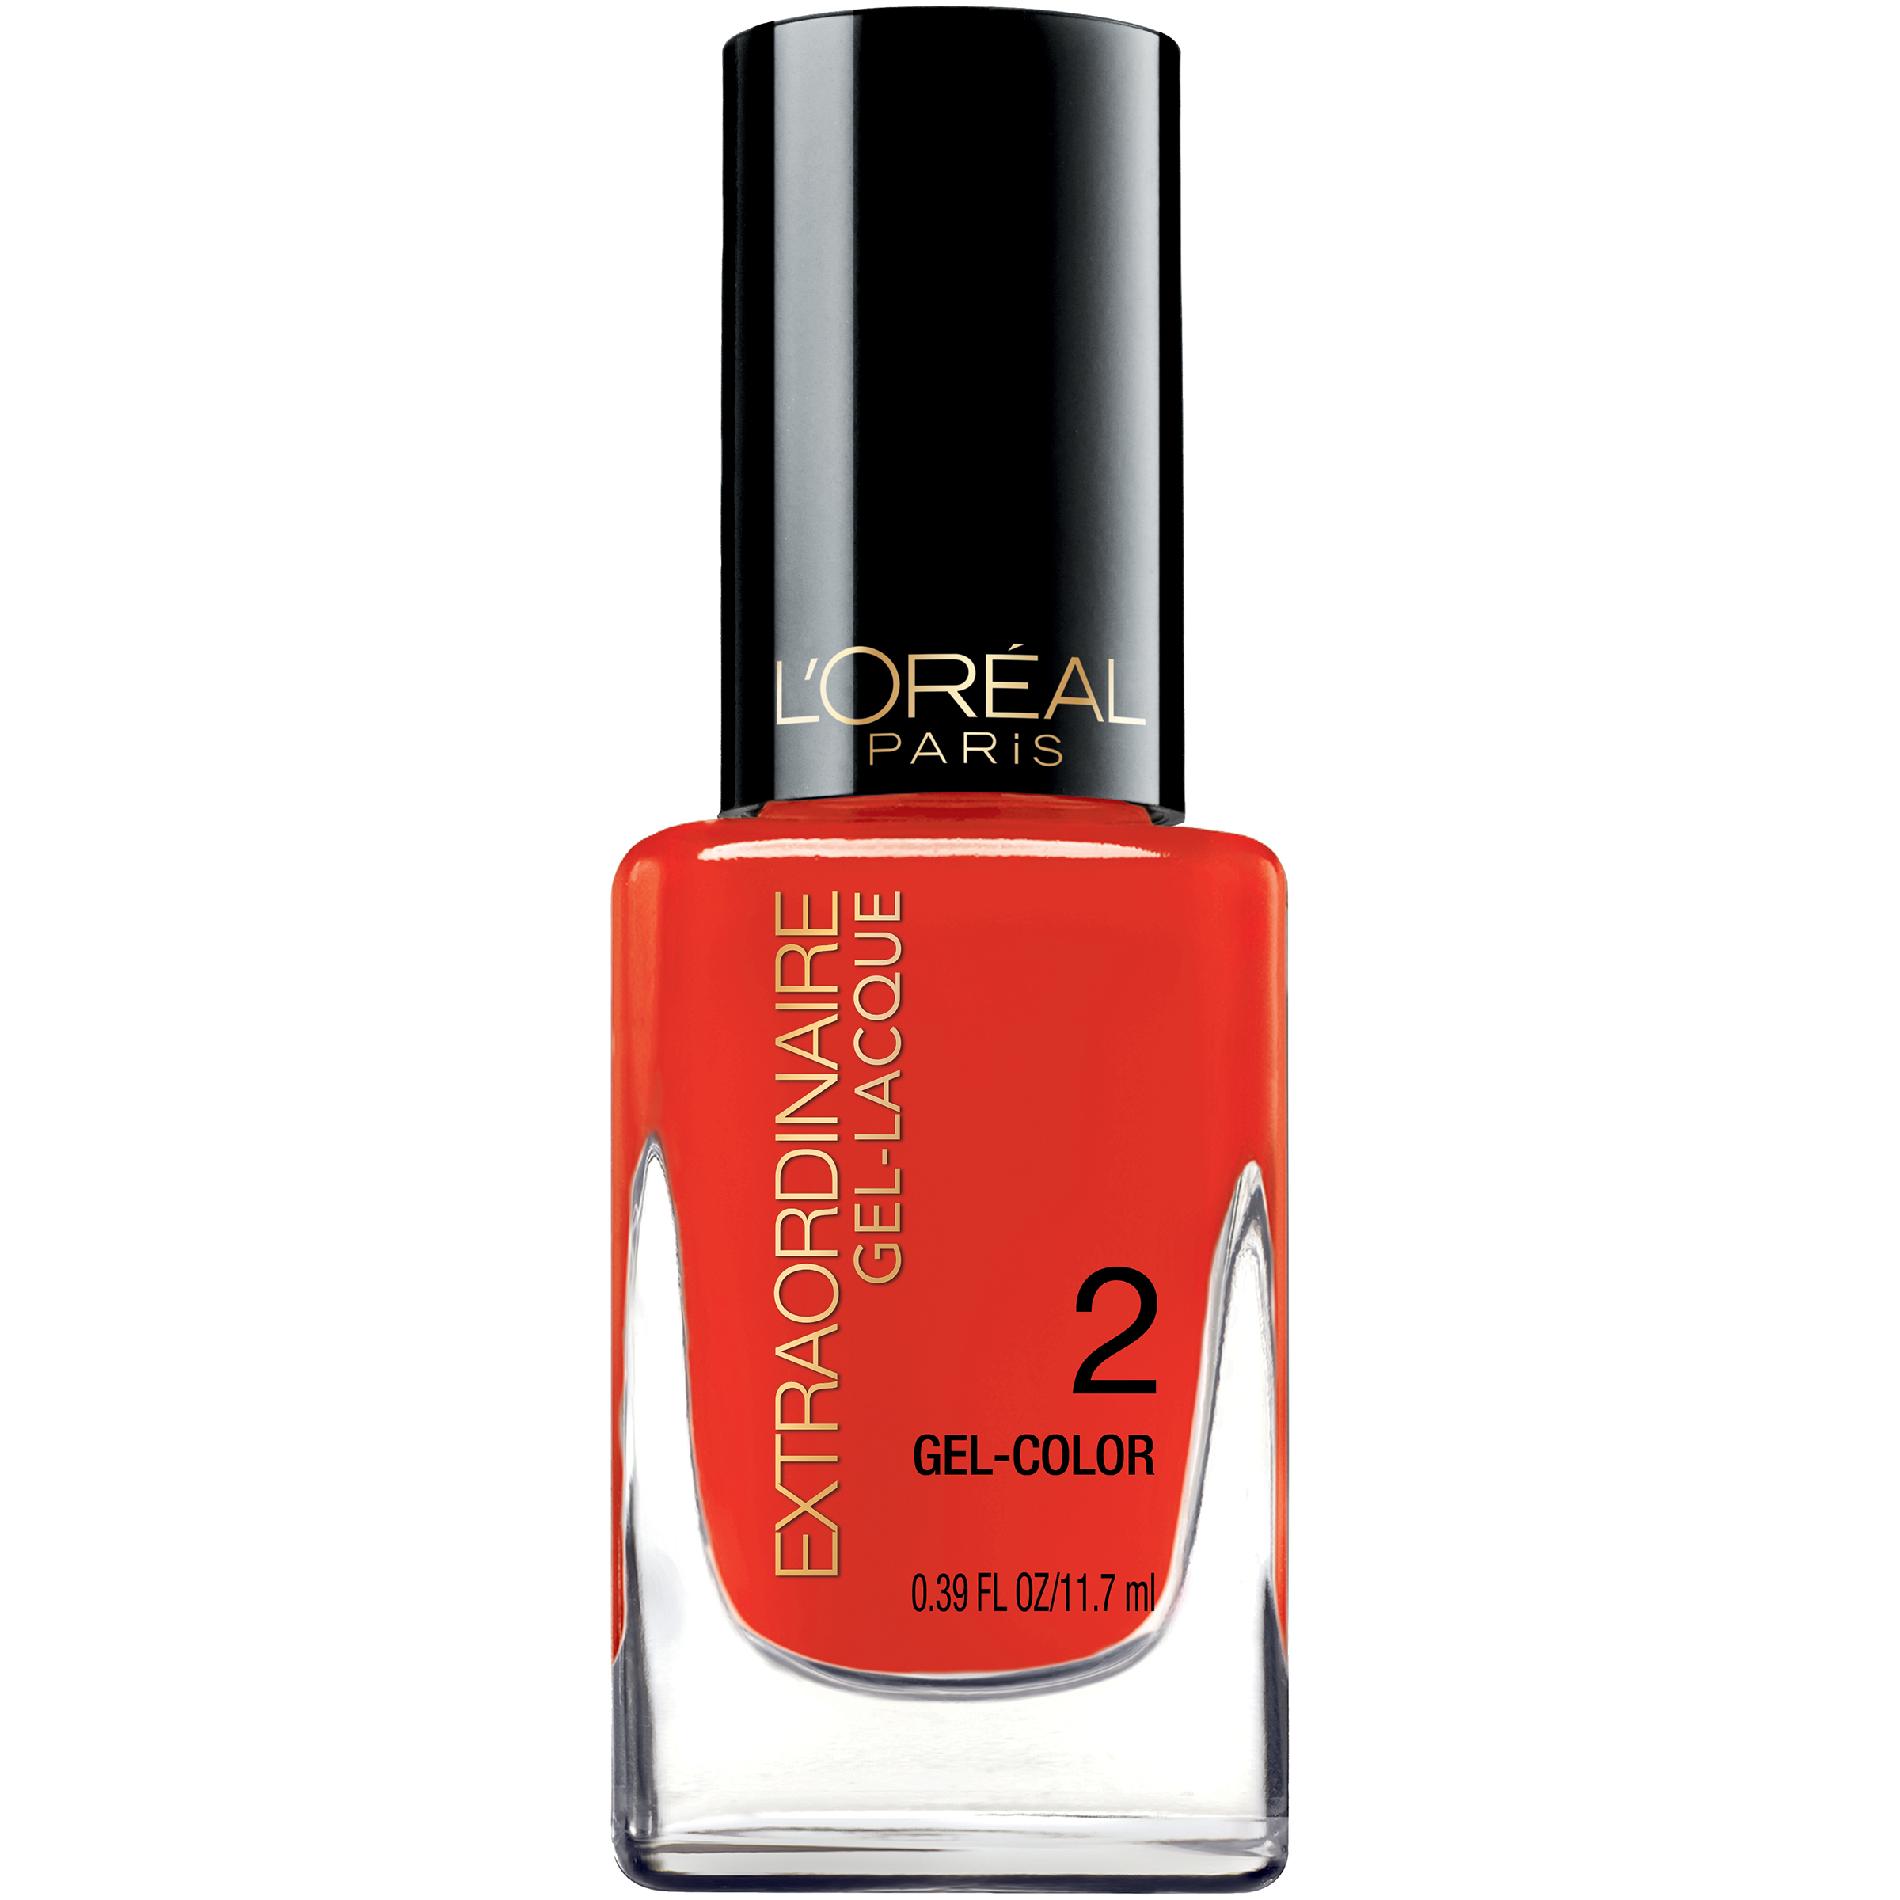 L'Oreal Gel-Lacque 1-2-3 Gel-Color, 711 Red-y to Shine?